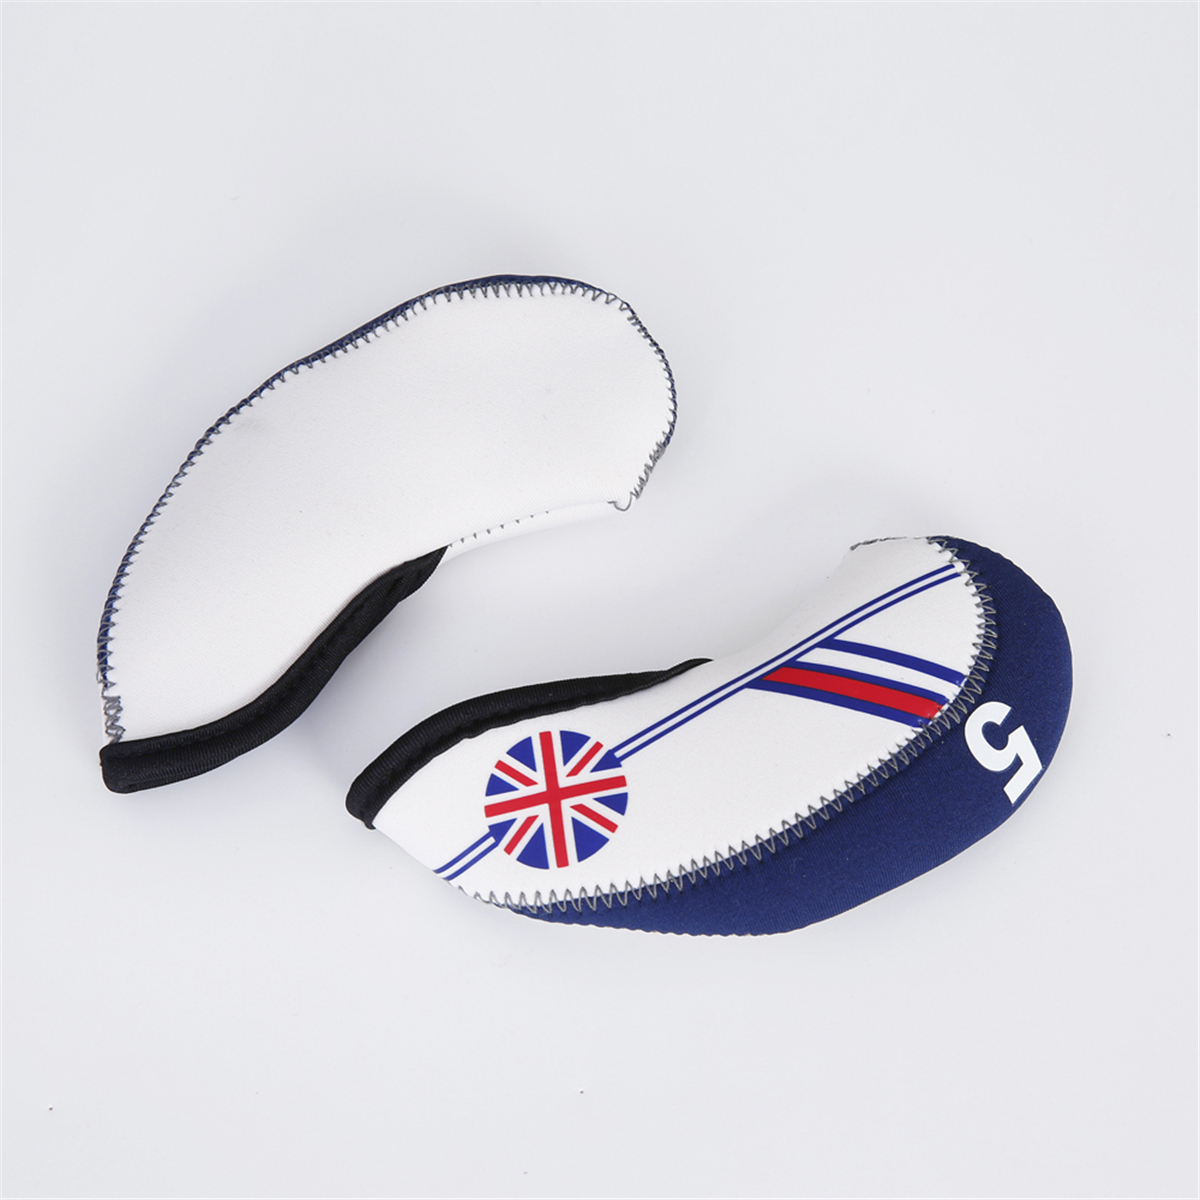 10Pcsset-Golf-Club-Iron-Head-Cover-Headcover-Neoprene-Protect-Set-National-Flag-Headcover-1469336-8